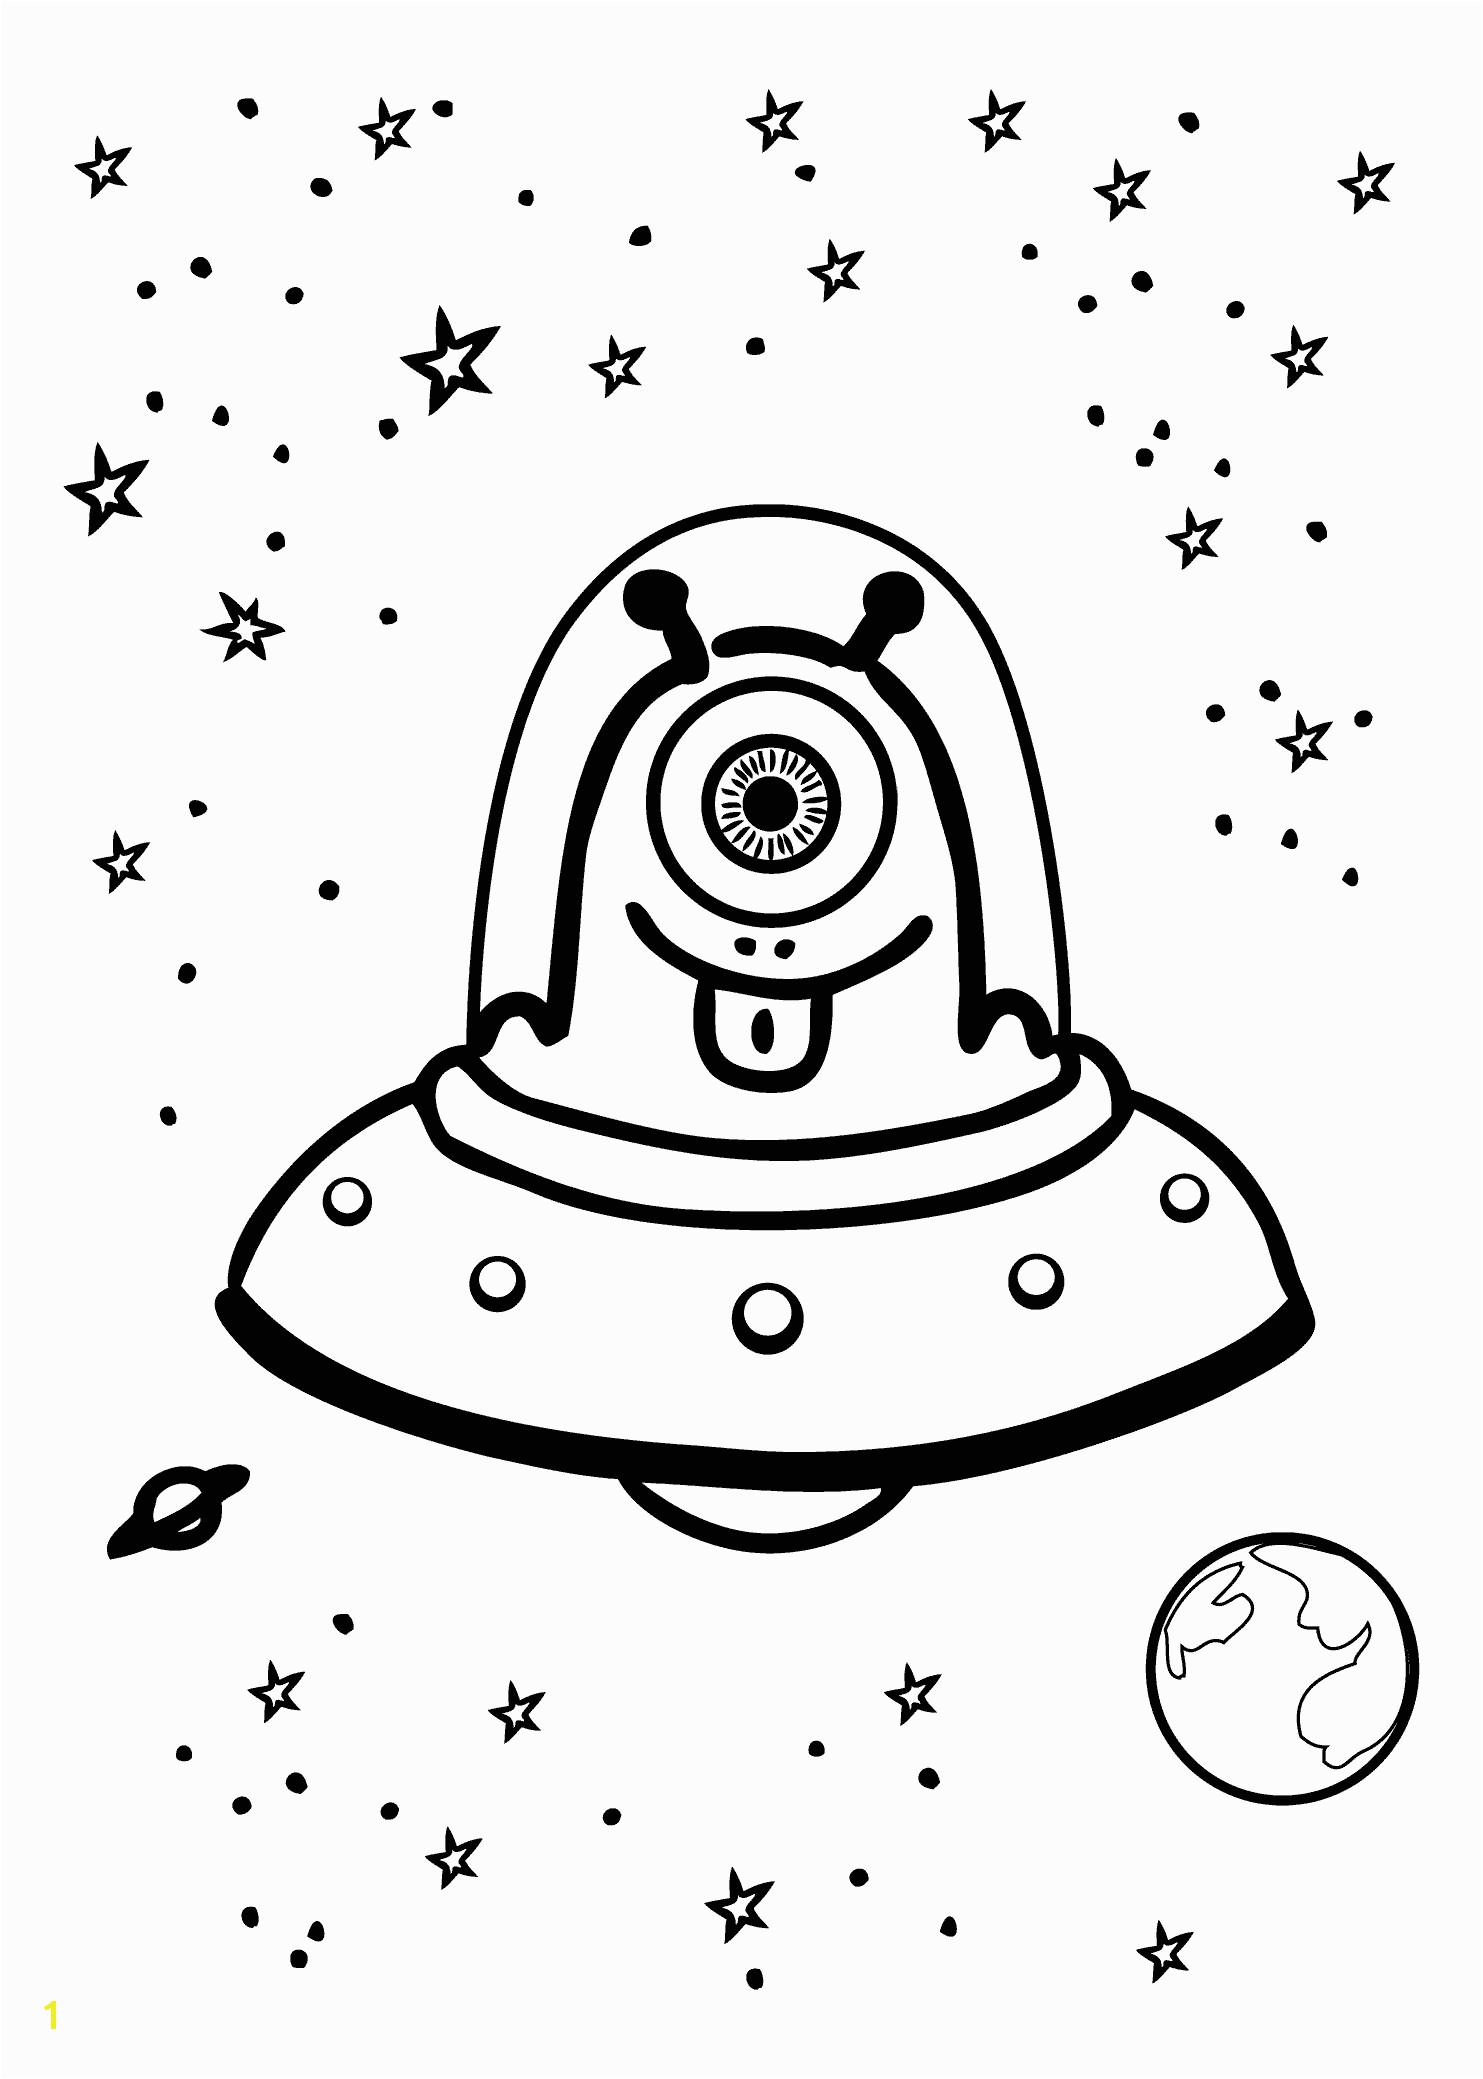 Space UFO Alien coloring pages coloring books thynedfgt